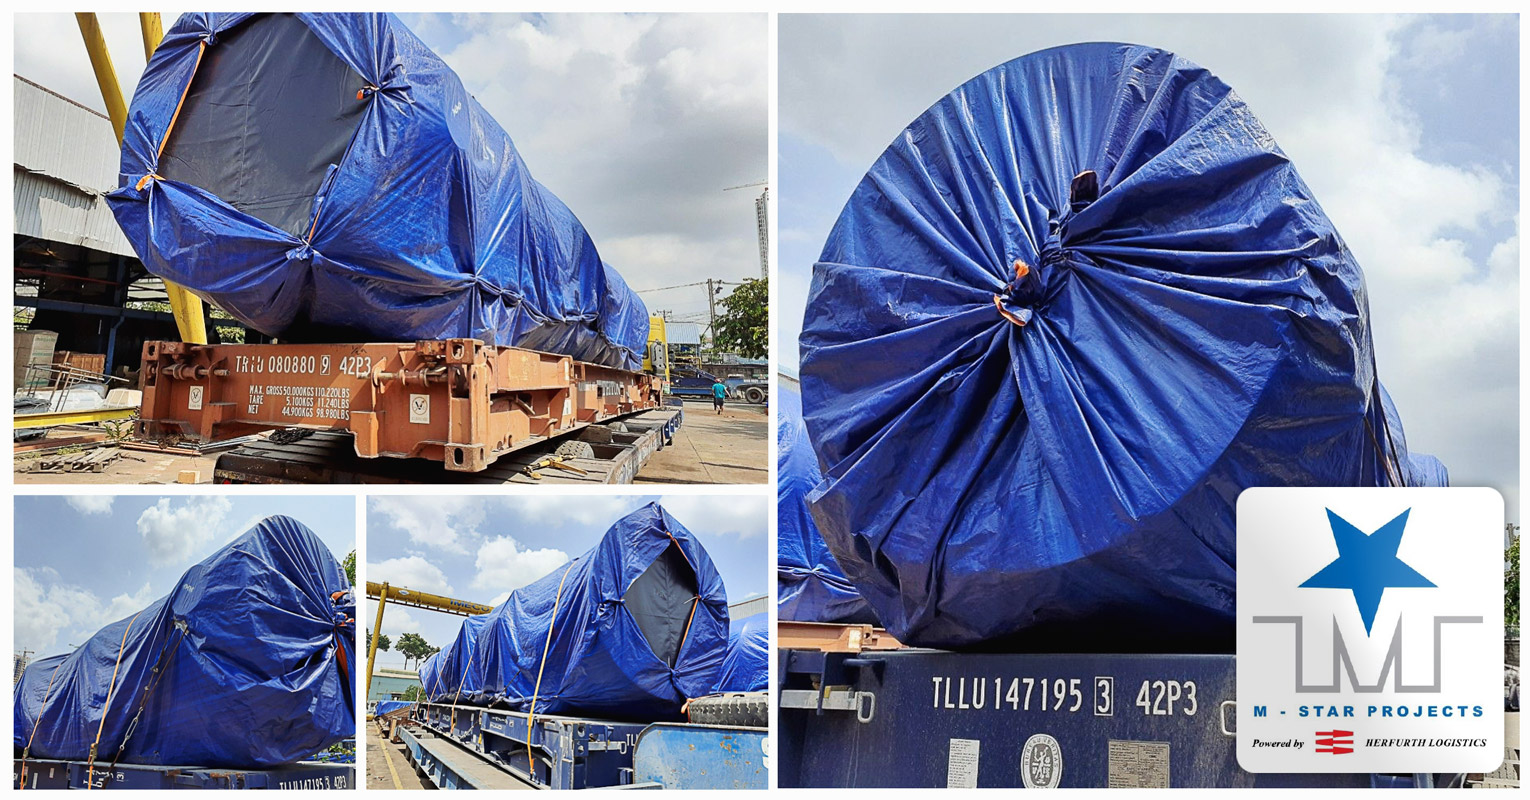 M-Star Projects Loaded Heavy Pieces Destined for Thailand